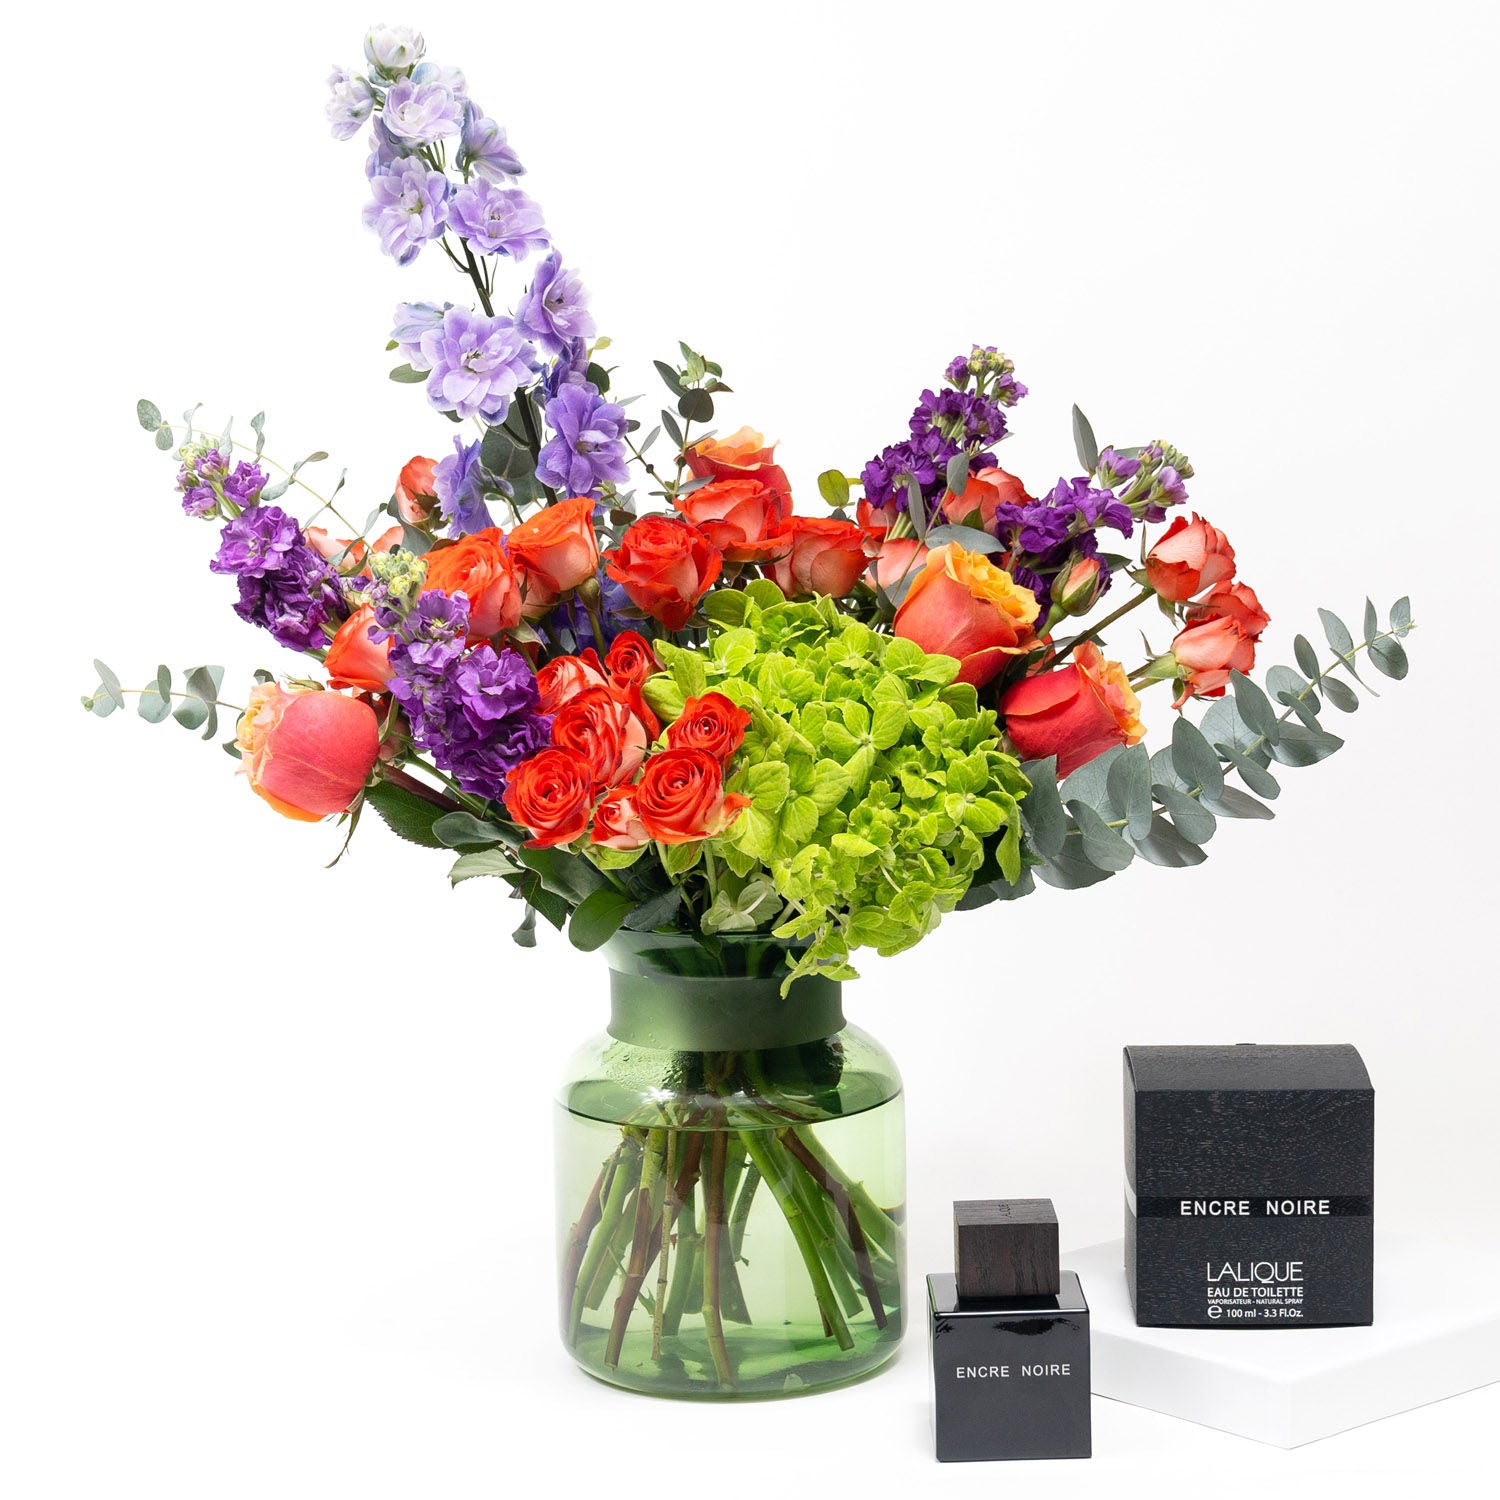 Mix Flowers Arrangement in Glass Vase with Perfume